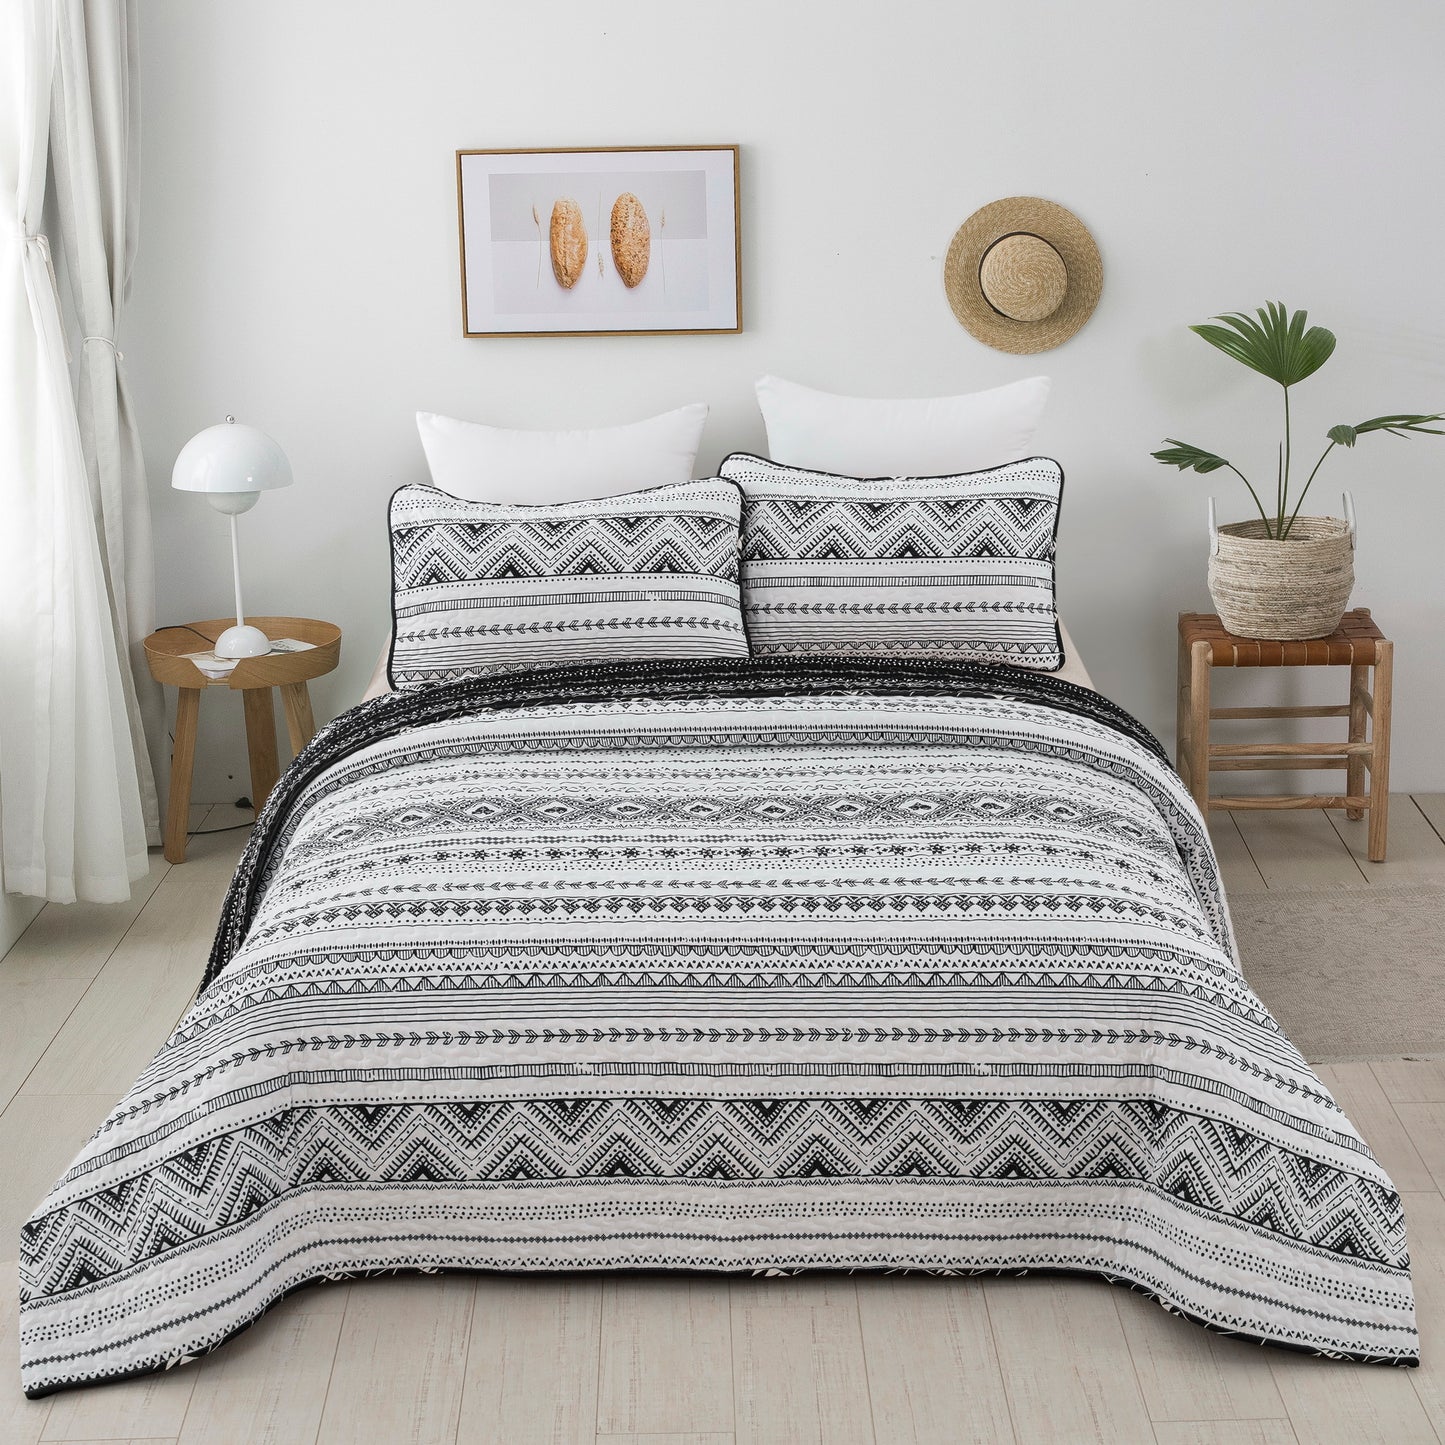 Double-sided Lines 3 Pieces Quilt Set Coverlet with 2 Pillowcases